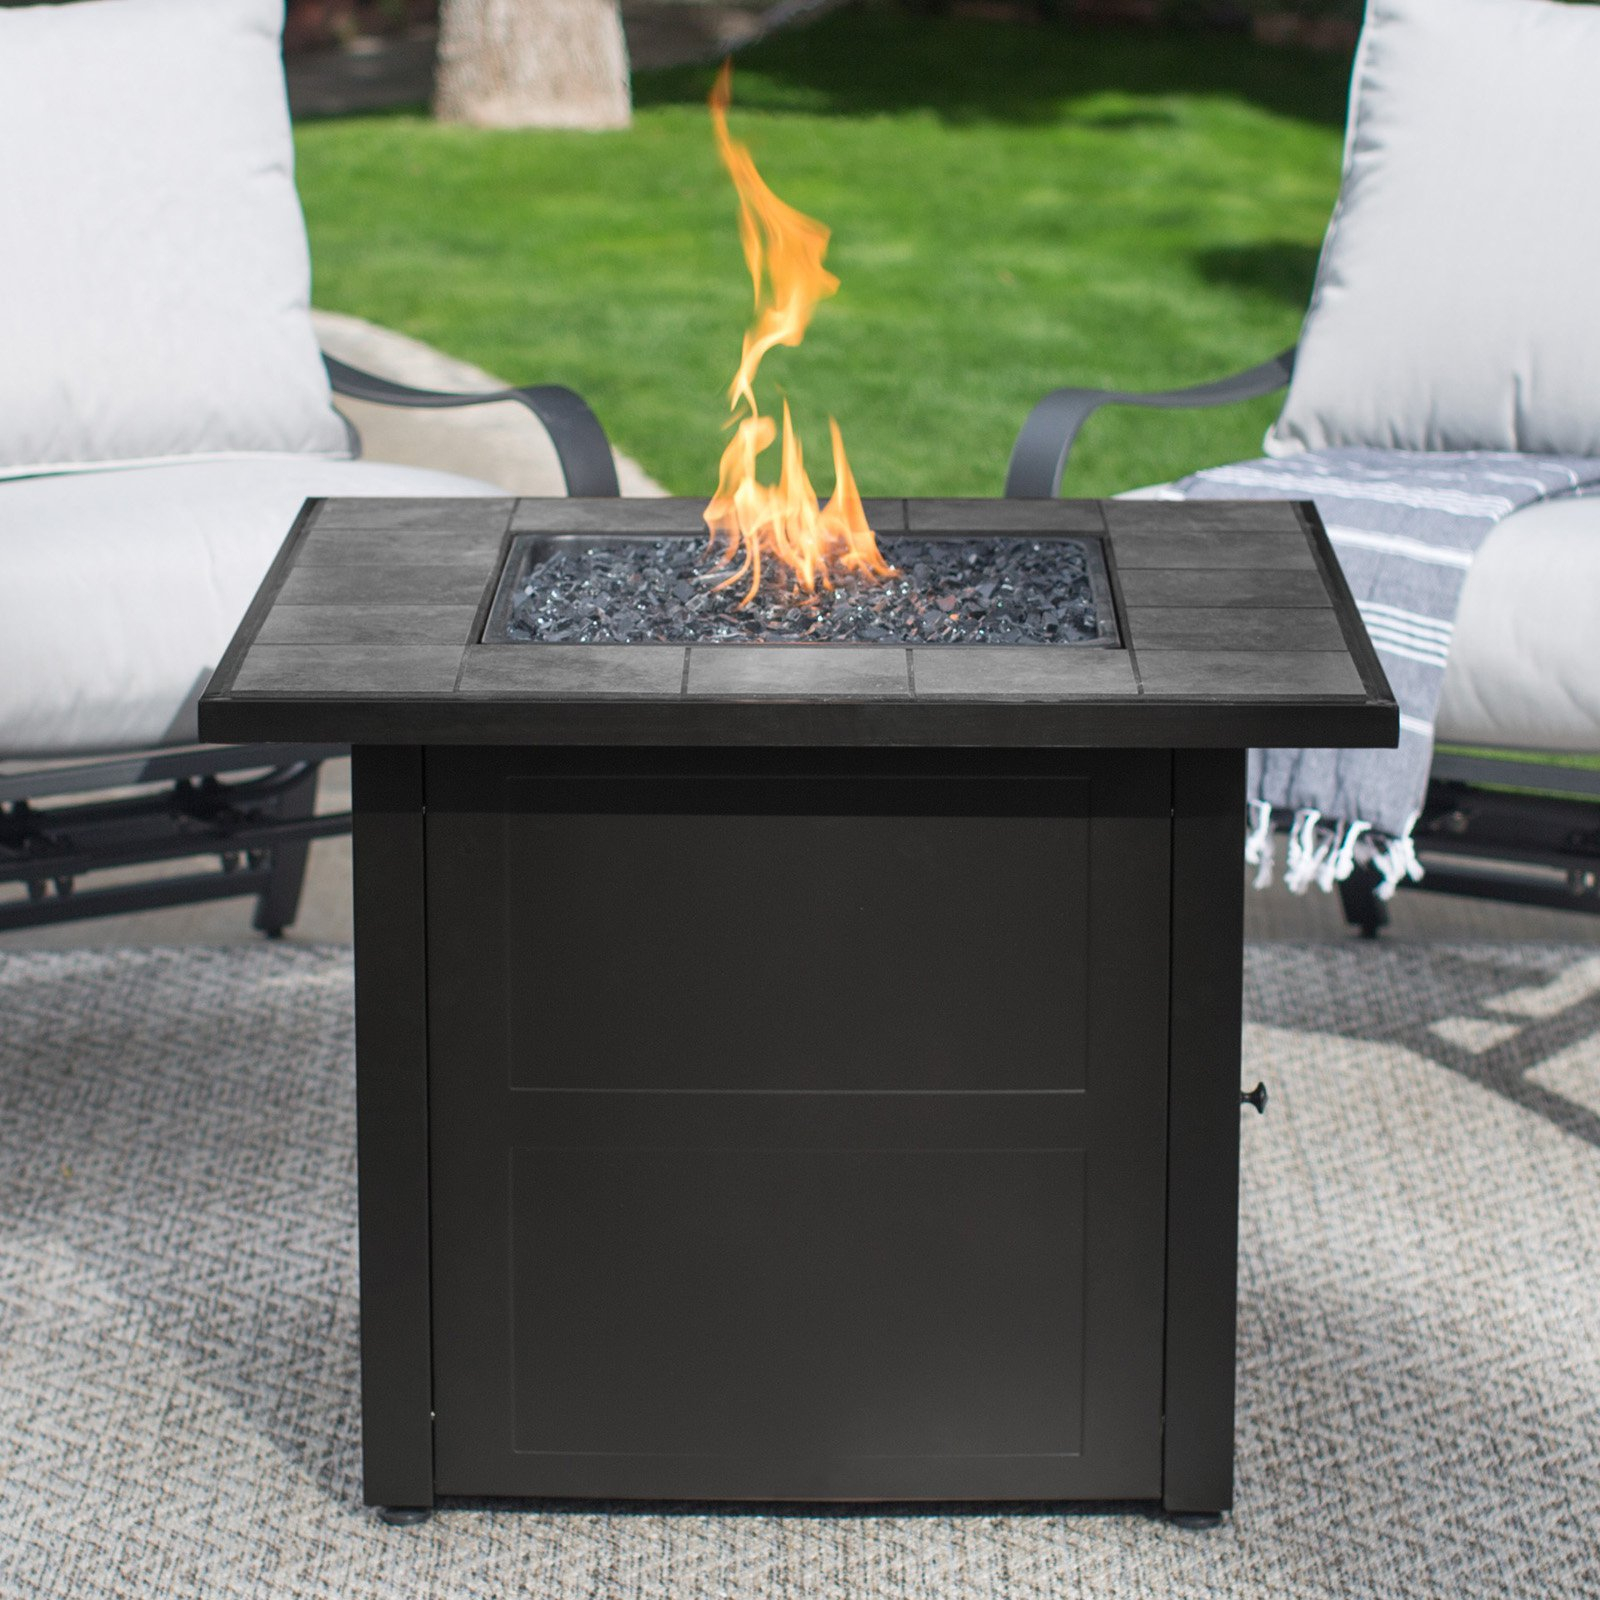 Endless Summer Lp Gas Outdoor Fire Pit Slate Tile Mantel Walmart with size 1600 X 1600